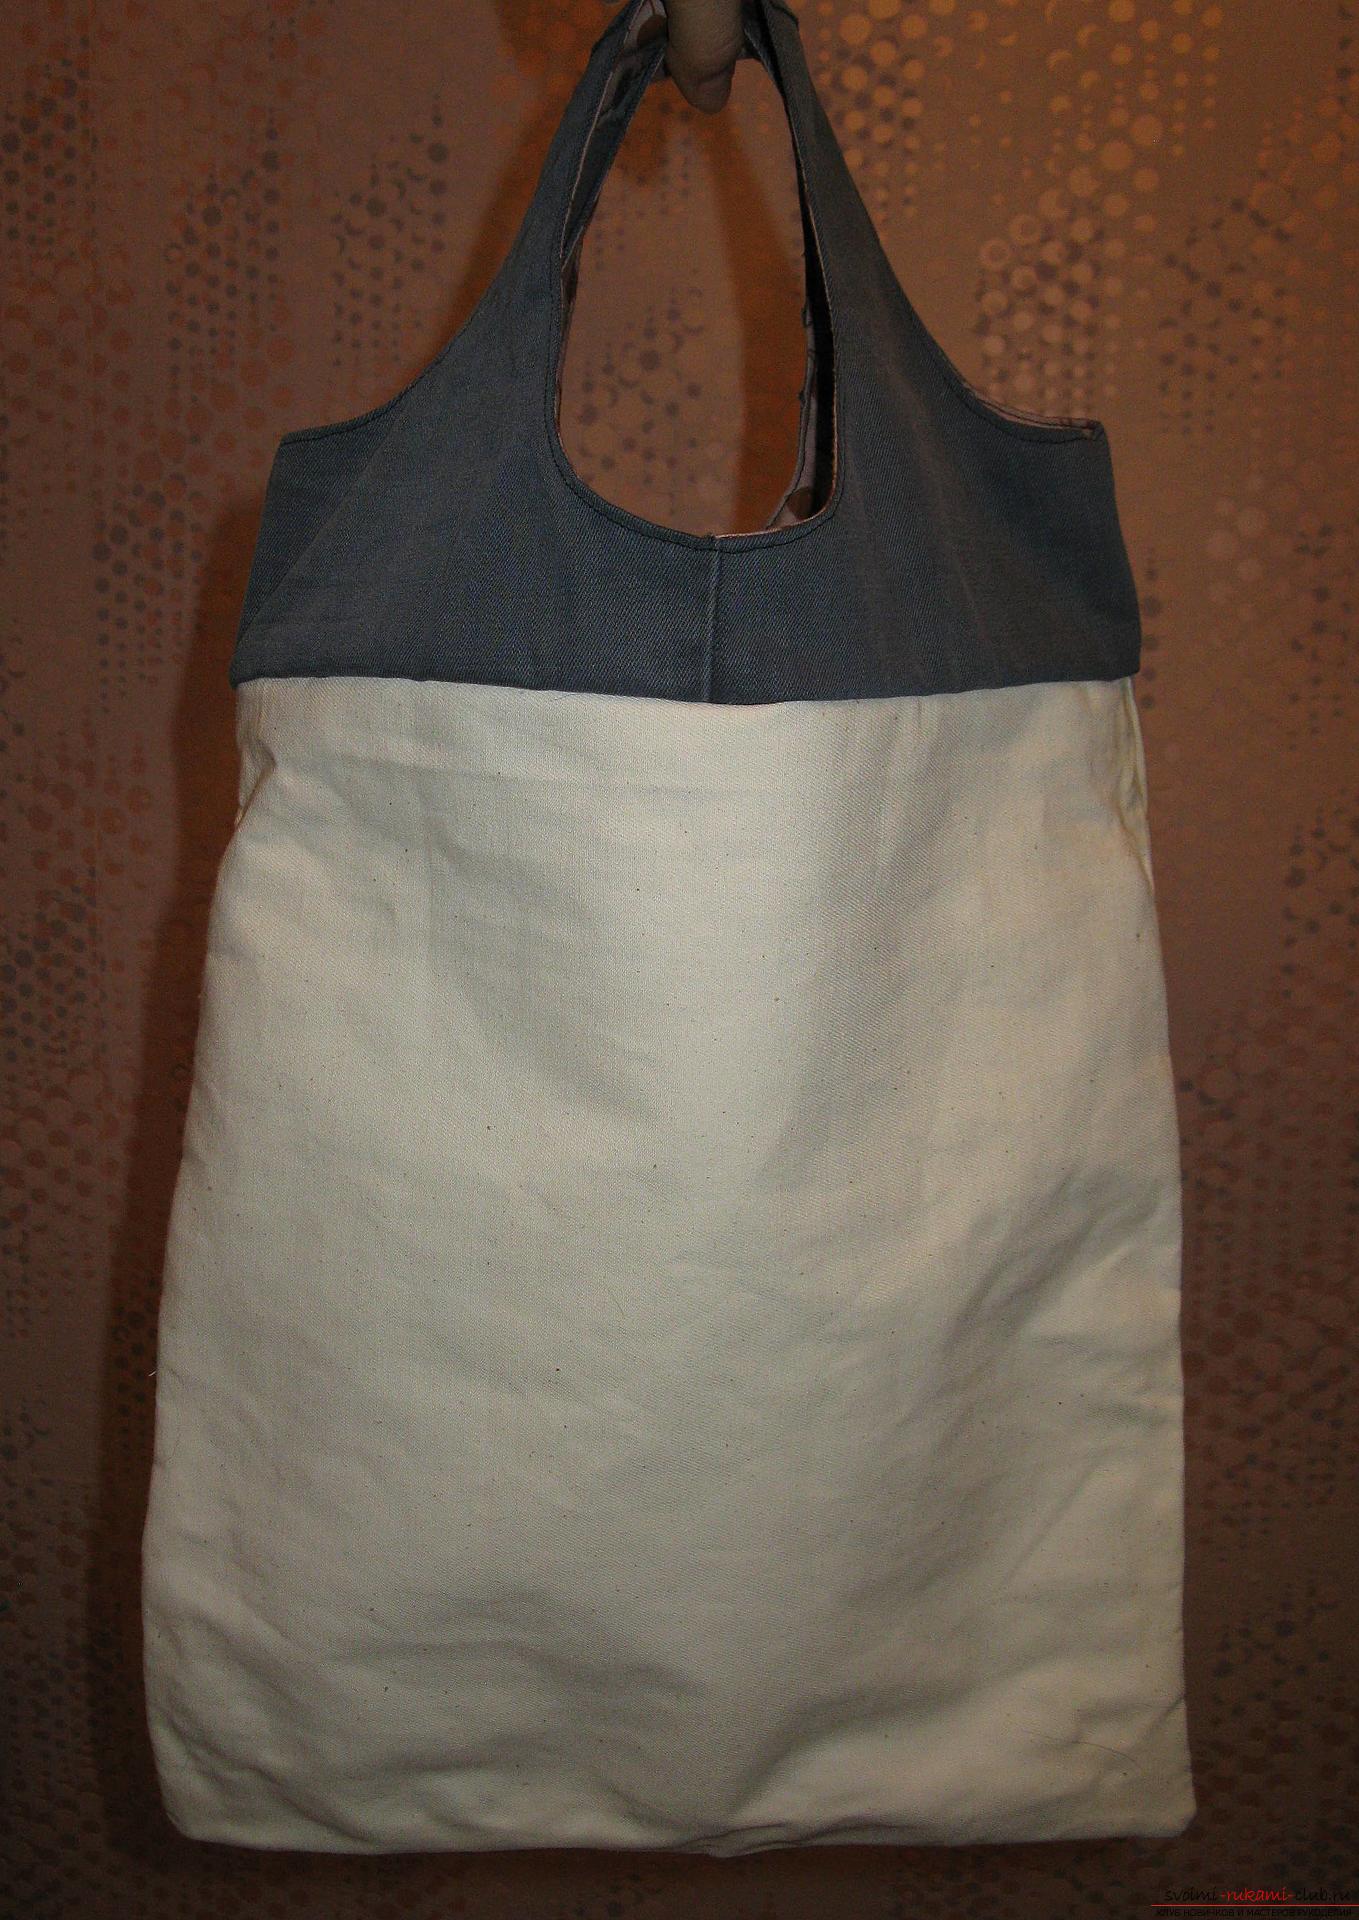 Step-by-step photos to the lesson on sewing a shopping bag. Photo number 15